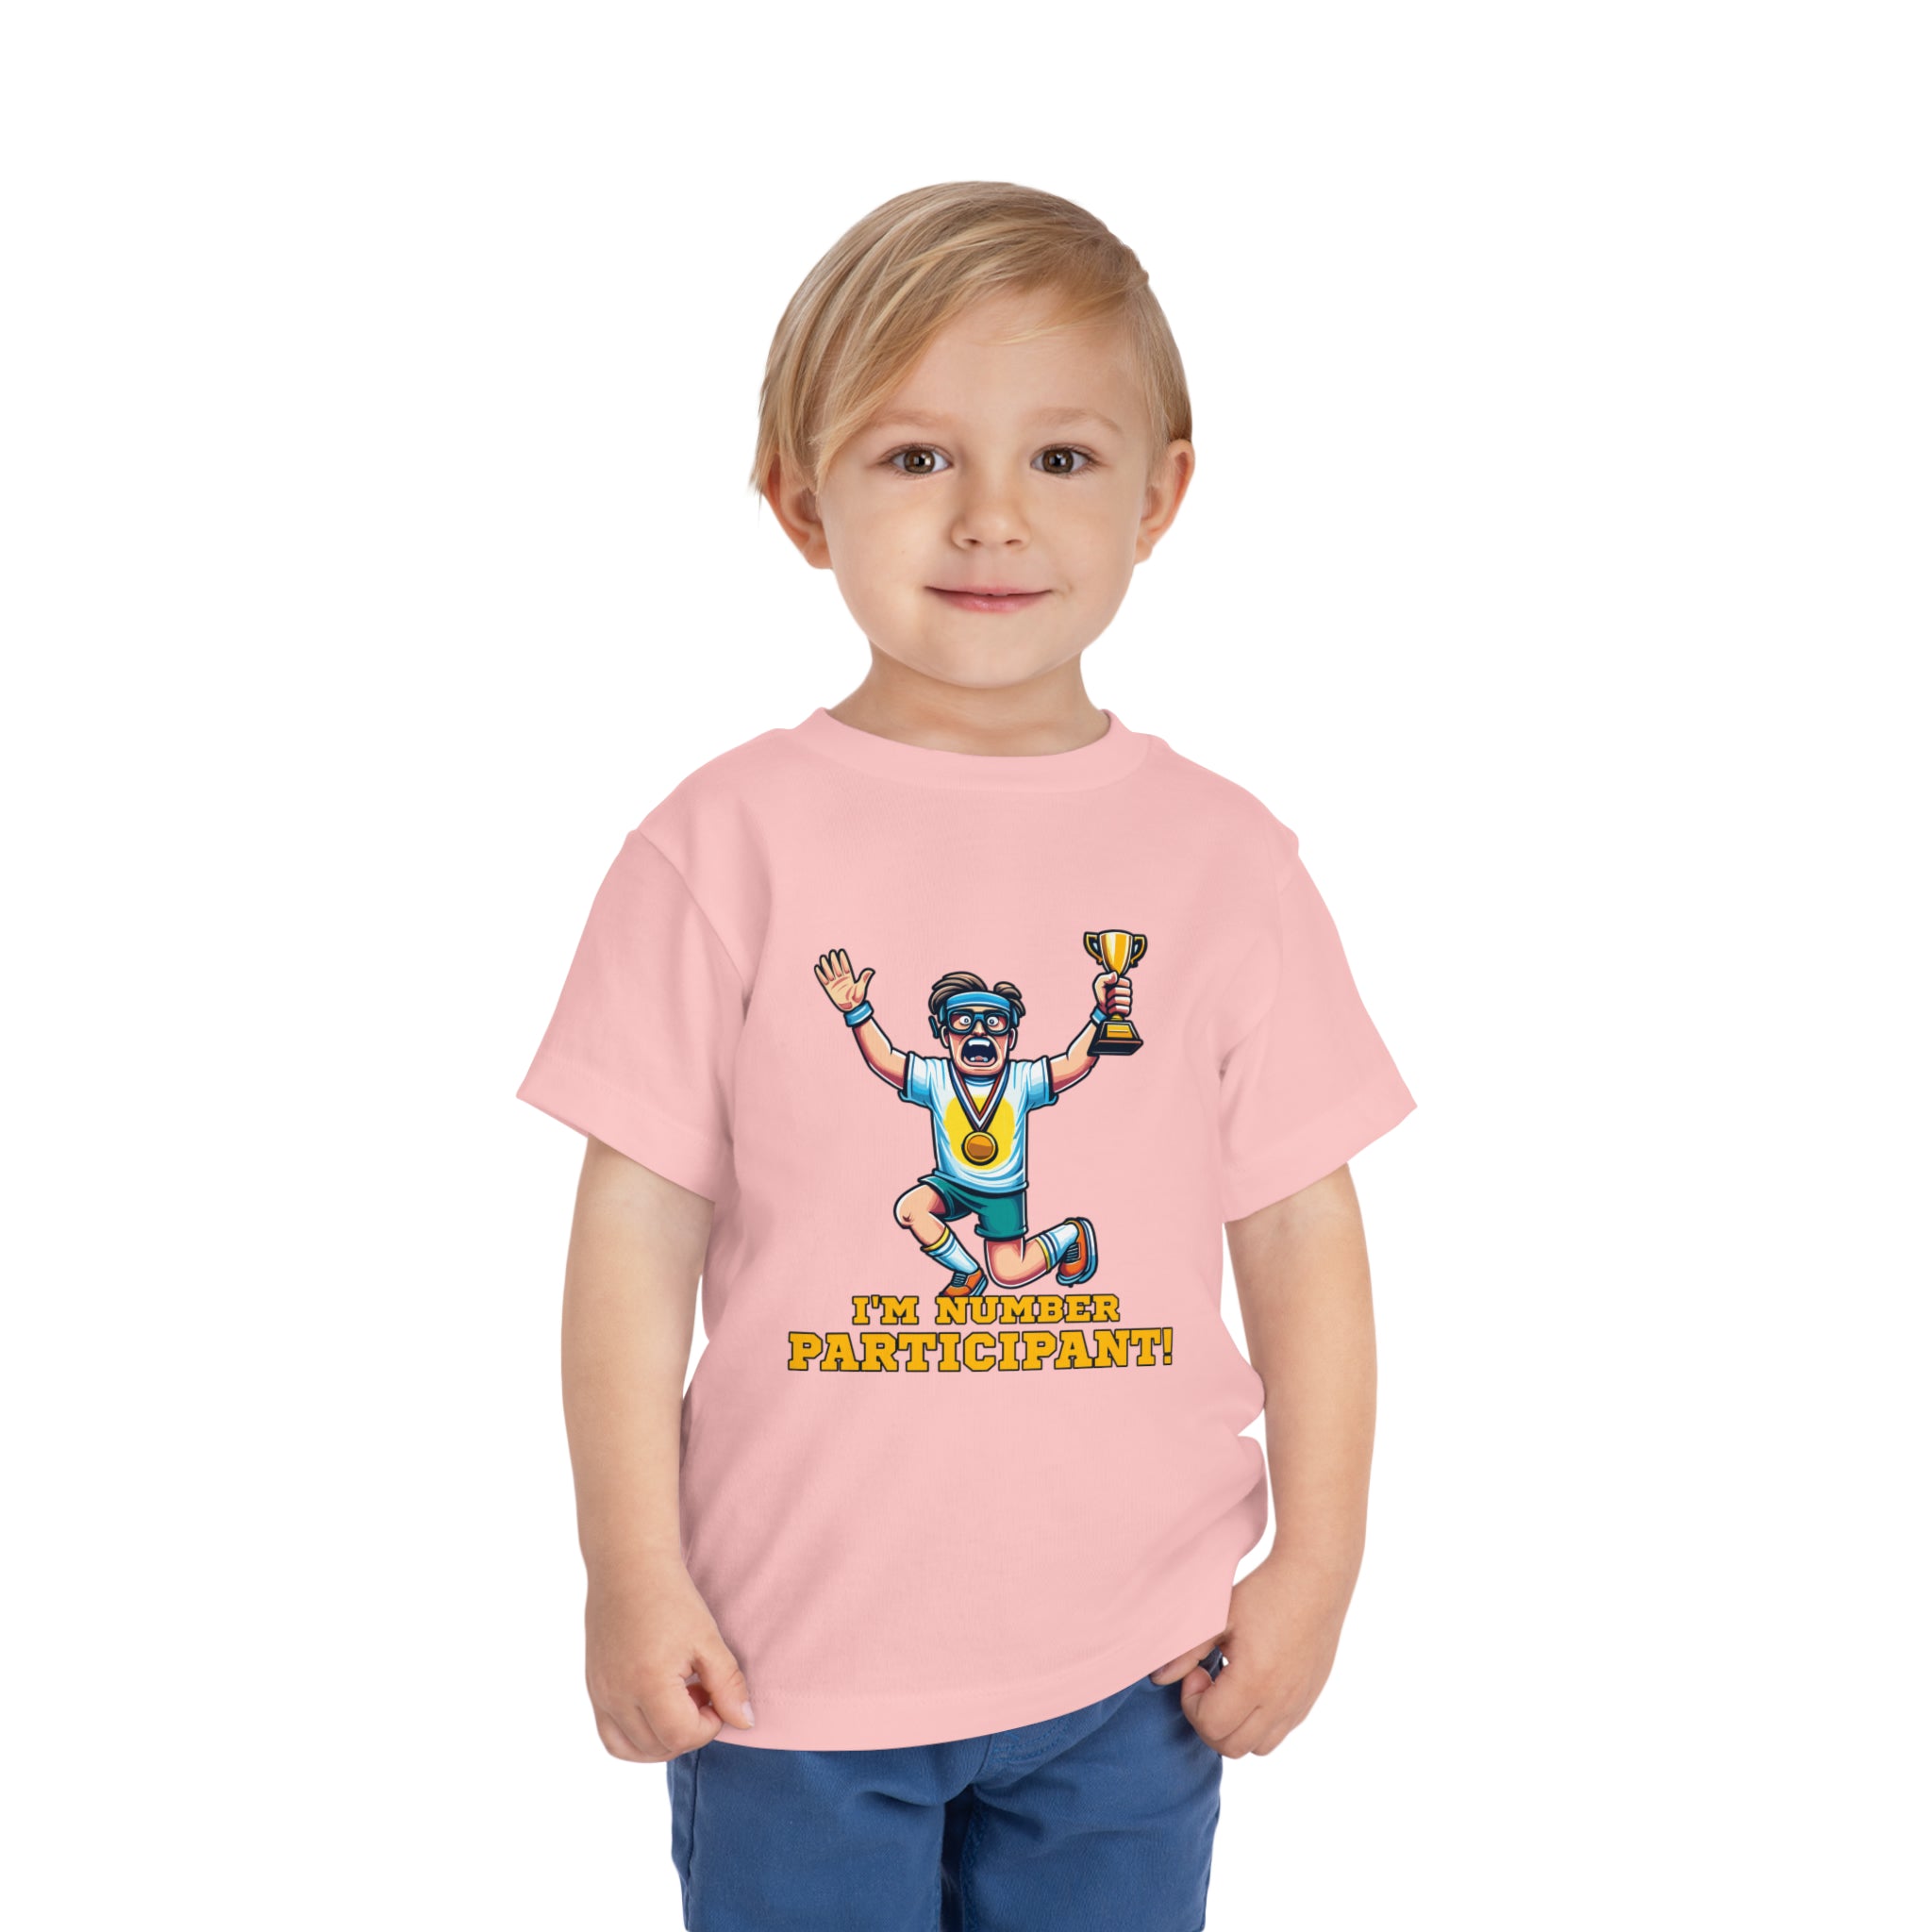 I'm Number Participant [Toddler Tee]